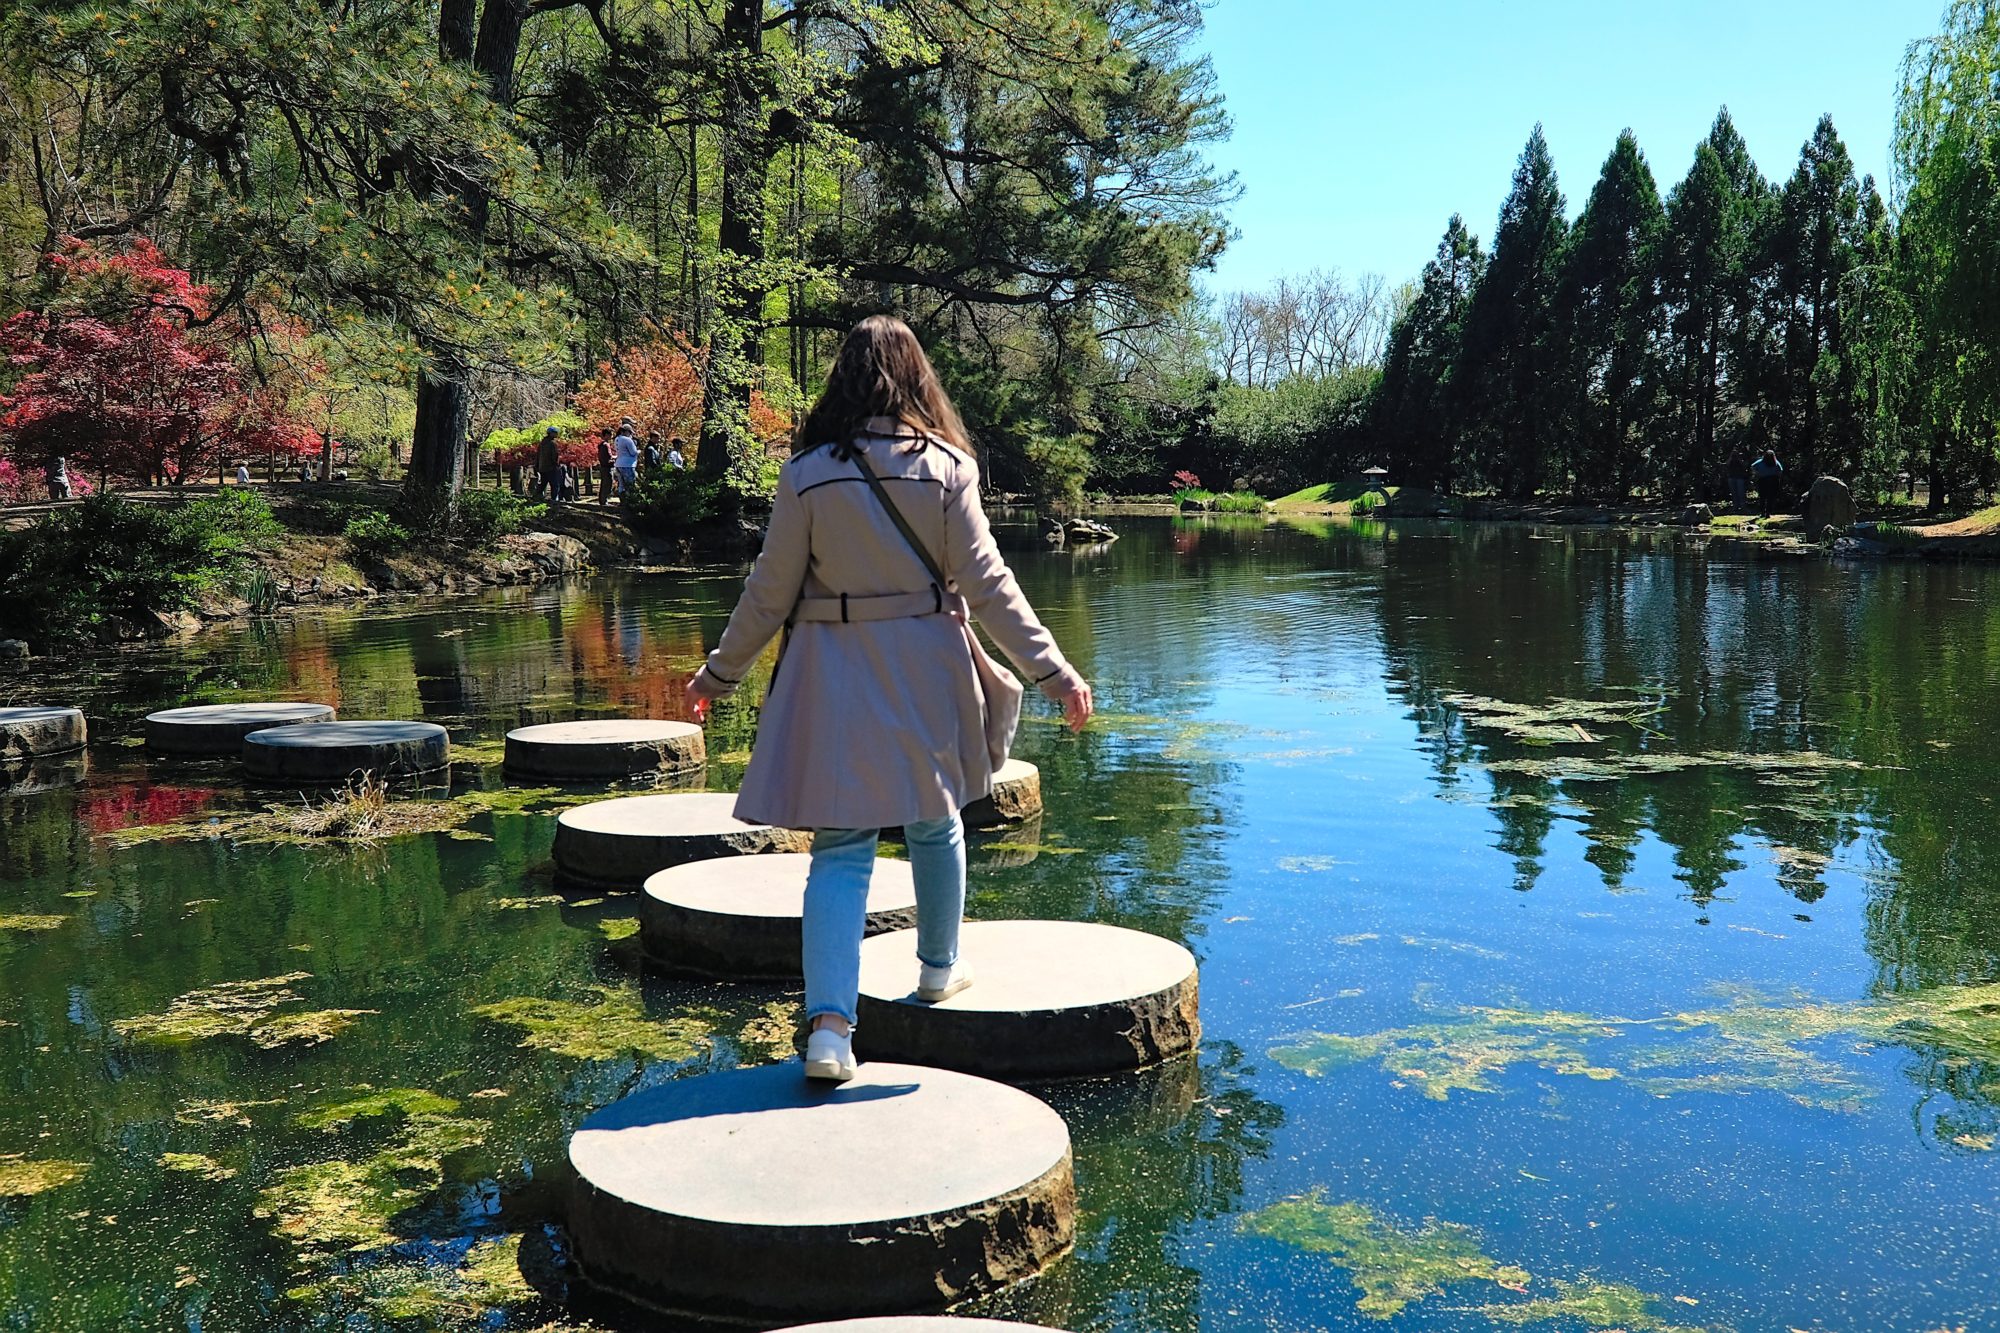 Alyssa steps on the stepping stones set over a pond